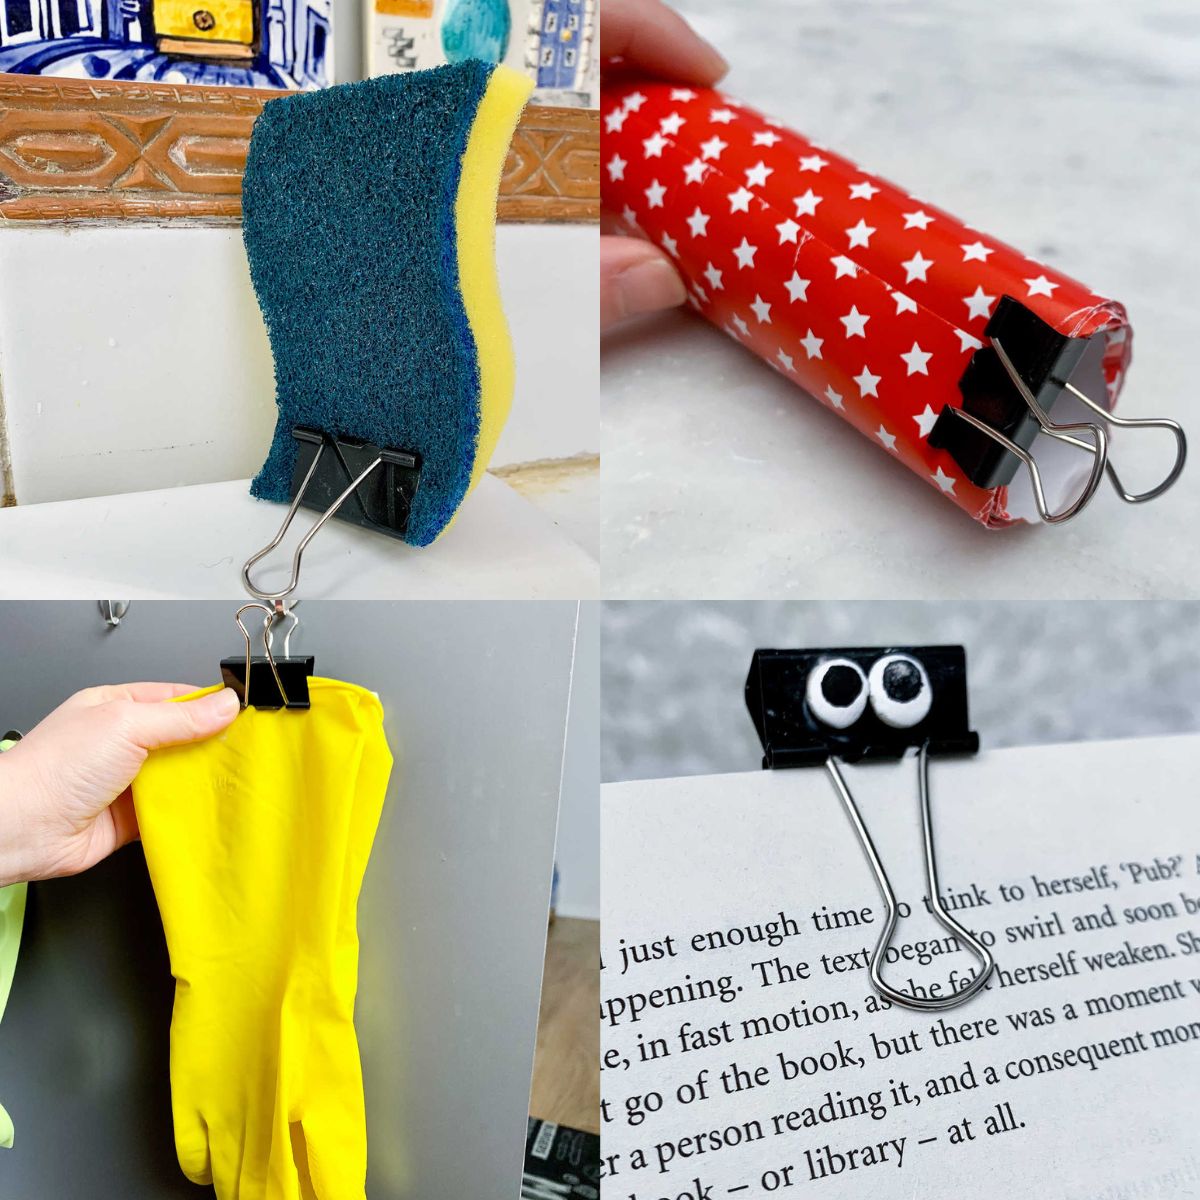 You’re thinking of the right thing–the oversized, more stable paper clip binder clips are very versatile in what they can stabilize.

The binder clip hacks will blow your mind! 😉

#Organizing #BinderClips
 LocalInfoForYou.com/350146/binder-…